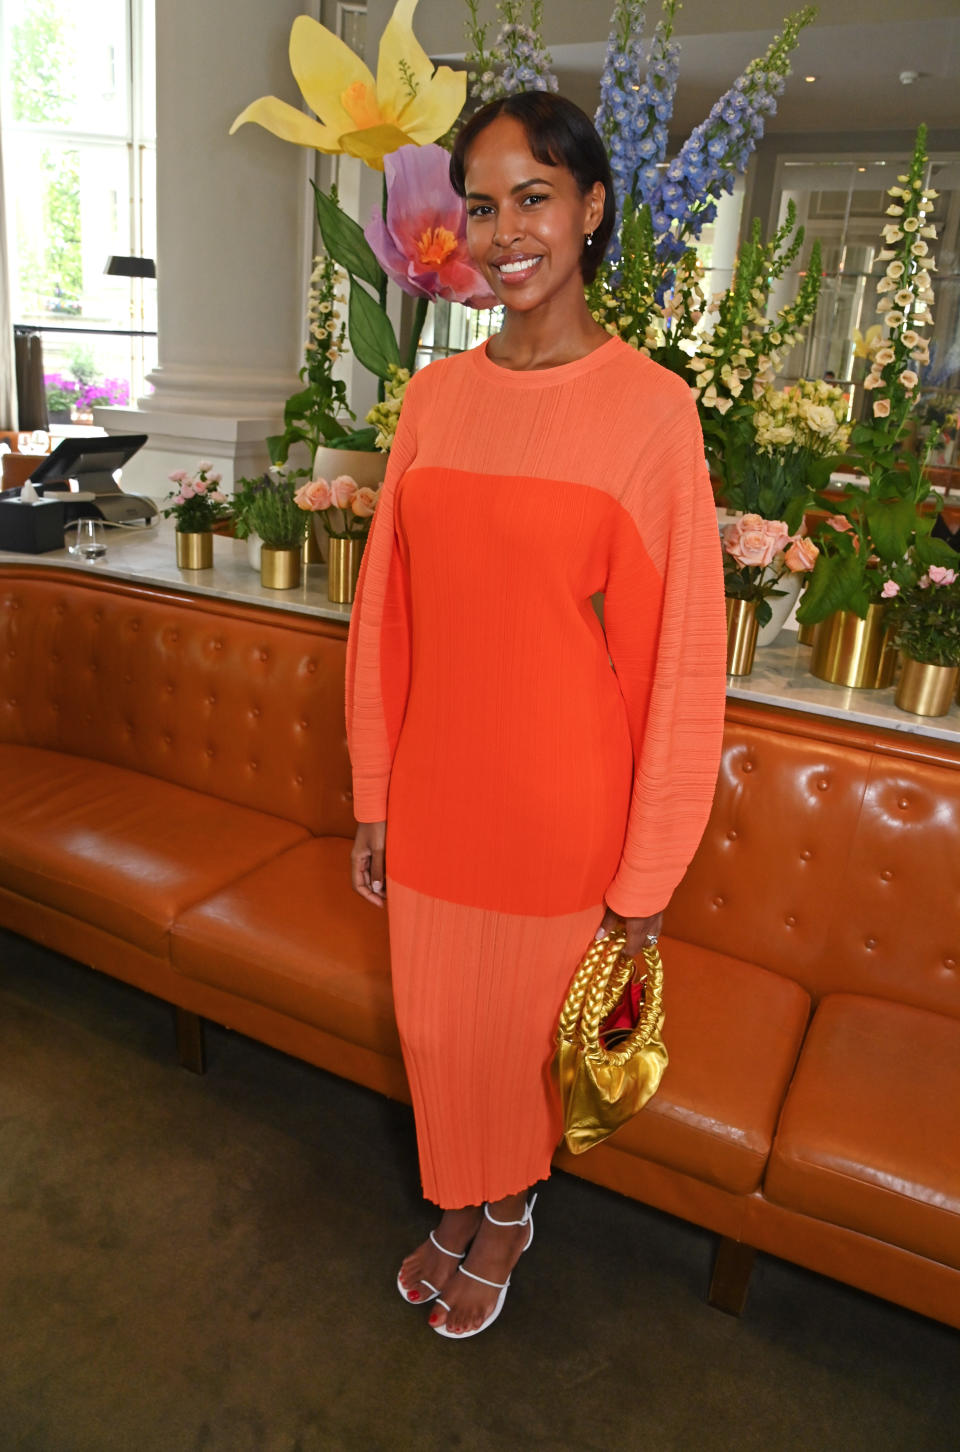 Sabrina Elba attends a lunch hosted by Corinthia London wearing strappy sandals